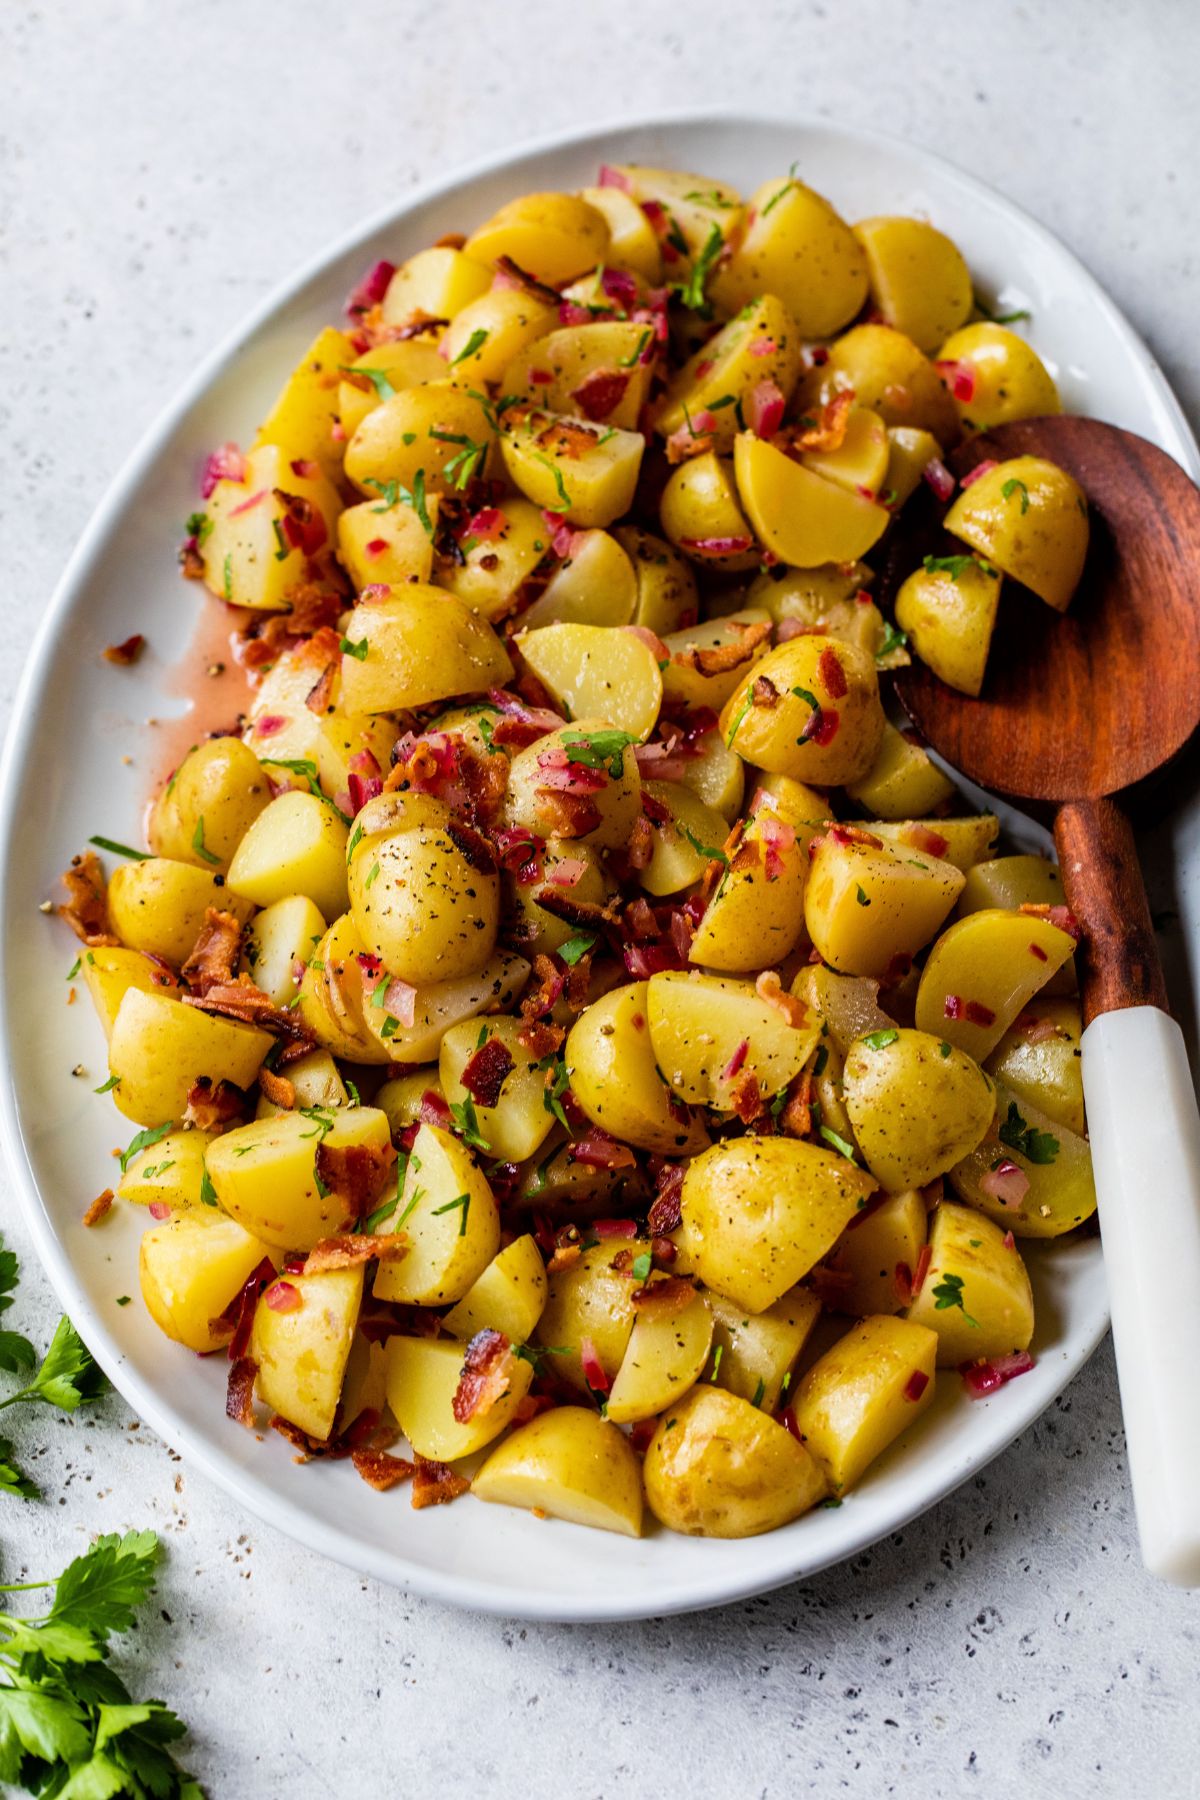 German potato salad served on a large white platter with a wooden serving spoon.